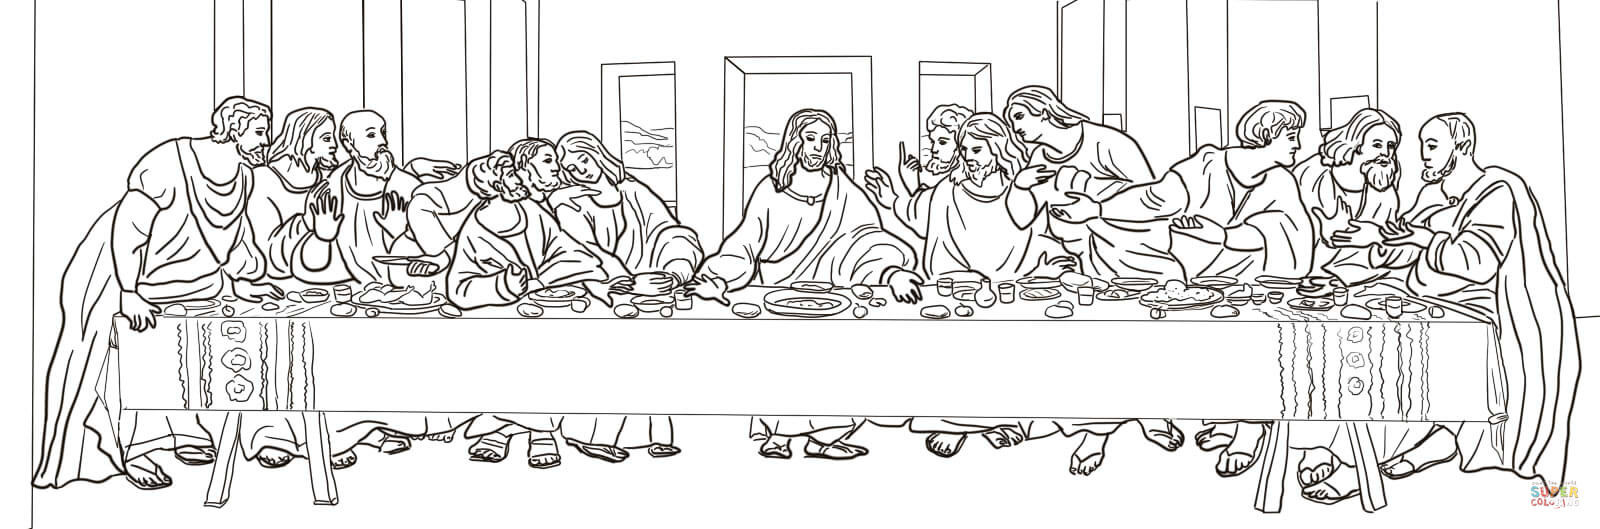 Last Supper Coloring Pages Printable
 The Last Supper by Leonardo da Vinci coloring page